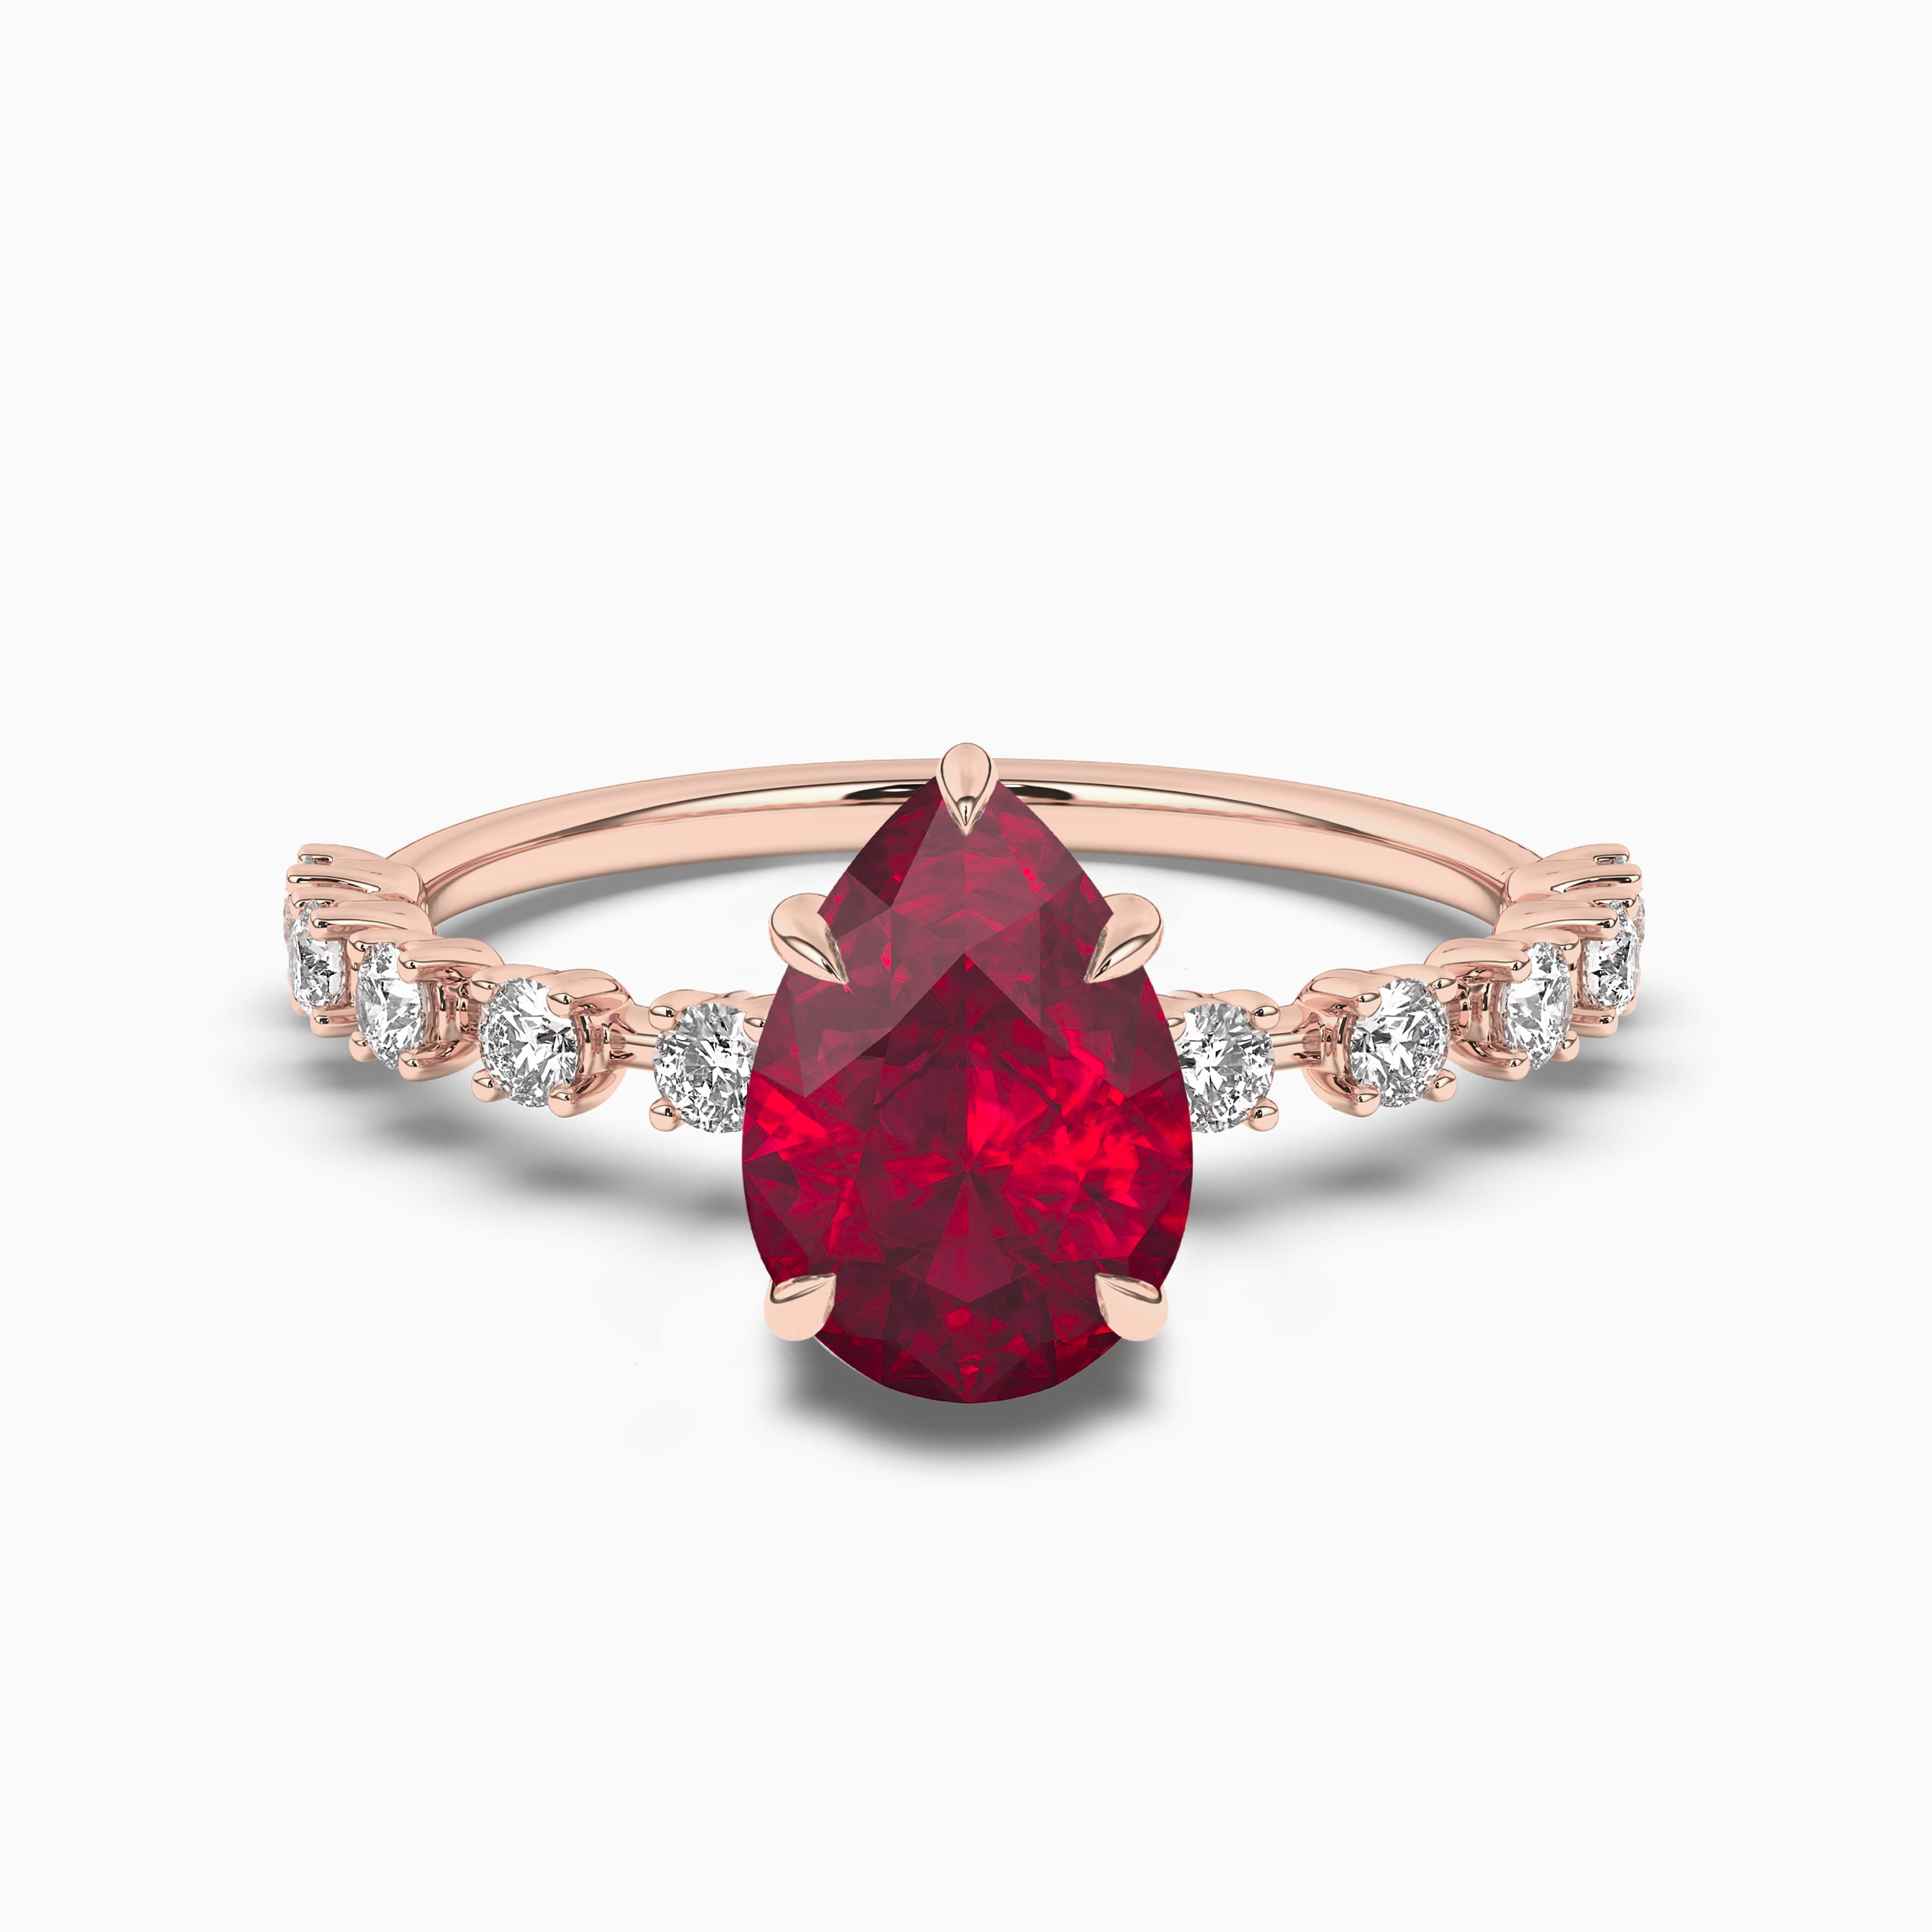 Pear Shape Ruby Ring with Diamonds